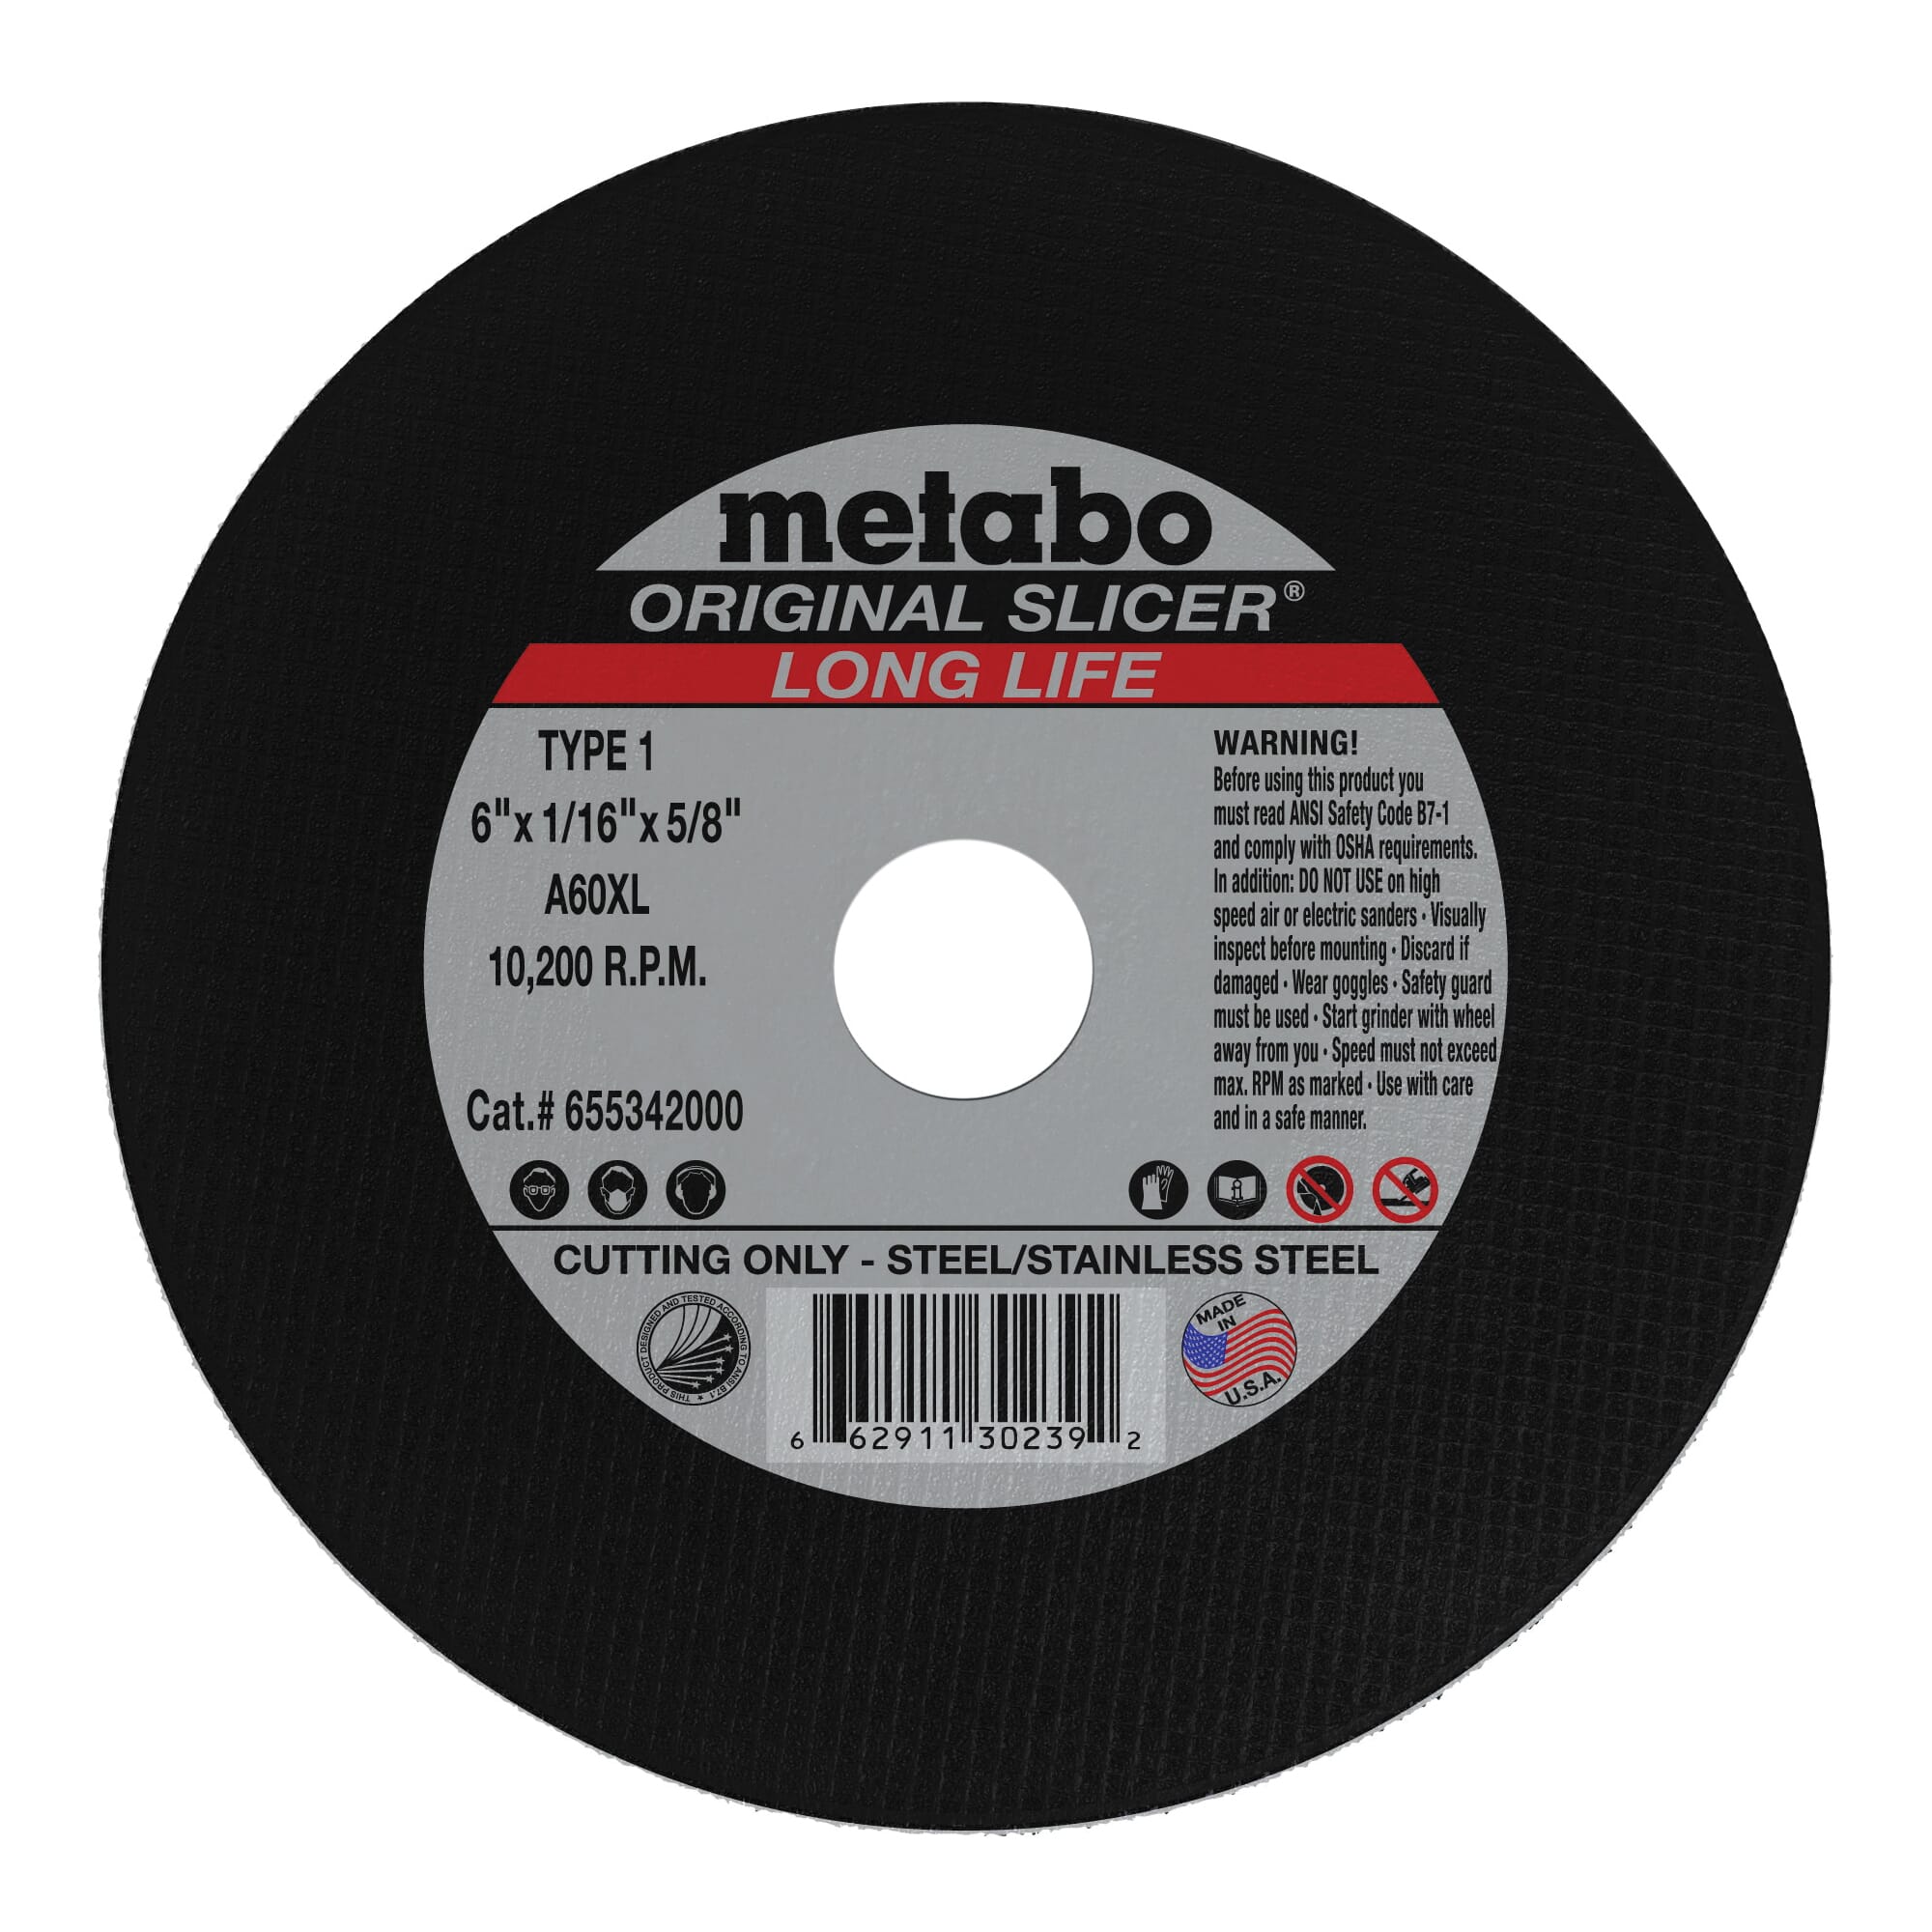 metabo® 655342000 Original Slicer Long Life Type 1 Straight Tough Cut-Off Wheel, 6 in Dia x 1/16 in THK, 5/8 in Center Hole, 60 Grit, Aluminum Oxide Abrasive